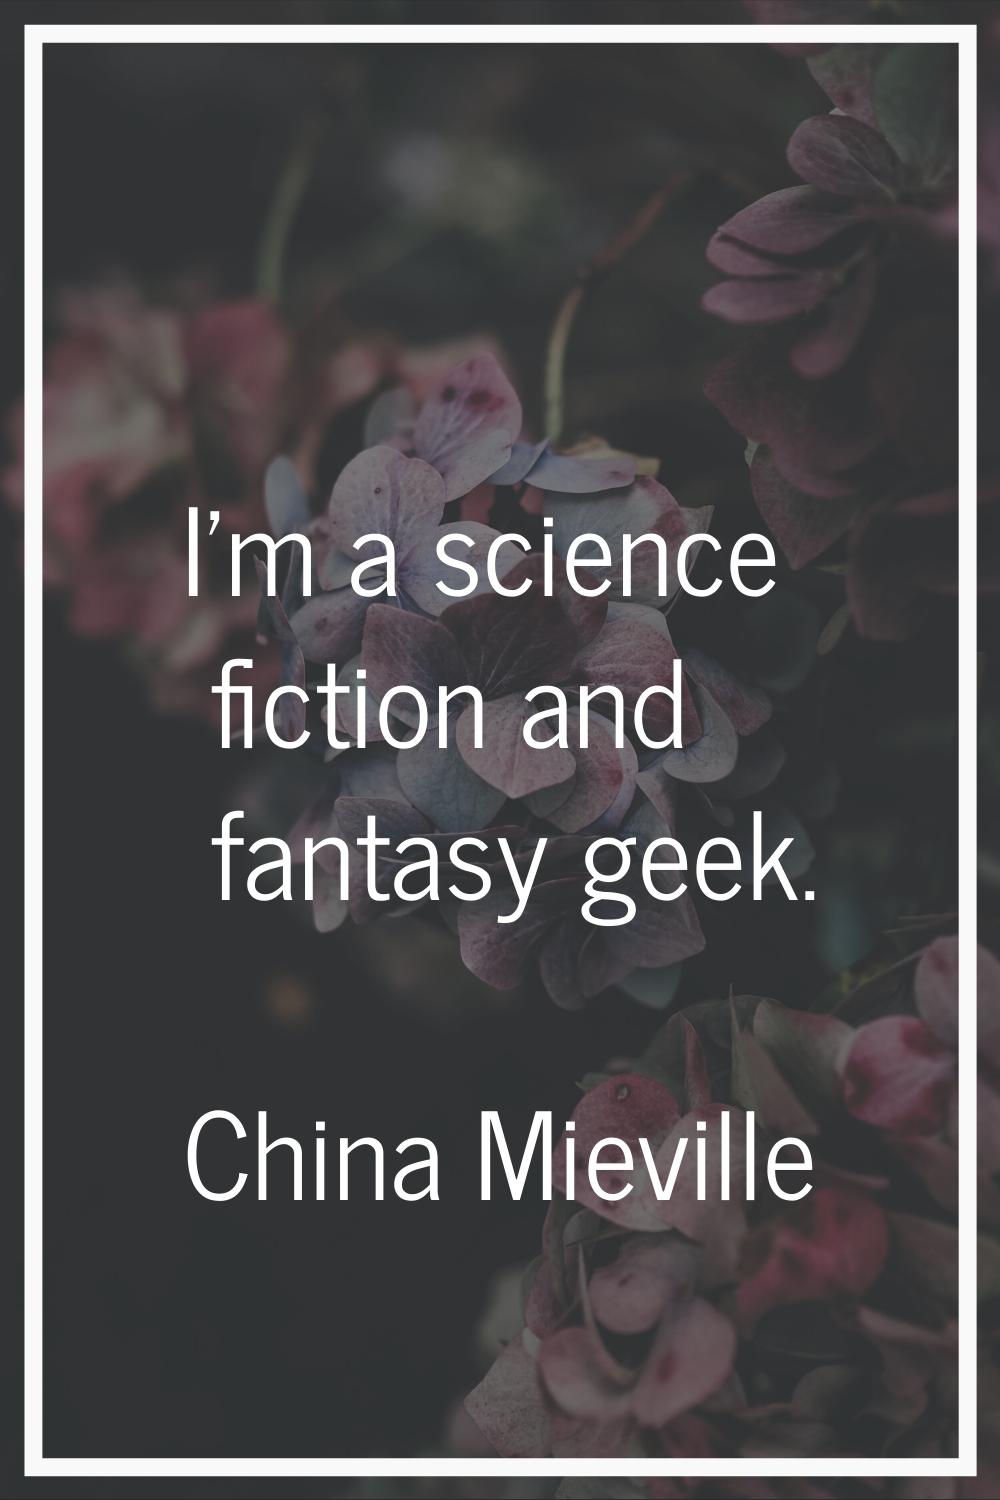 I'm a science fiction and fantasy geek.